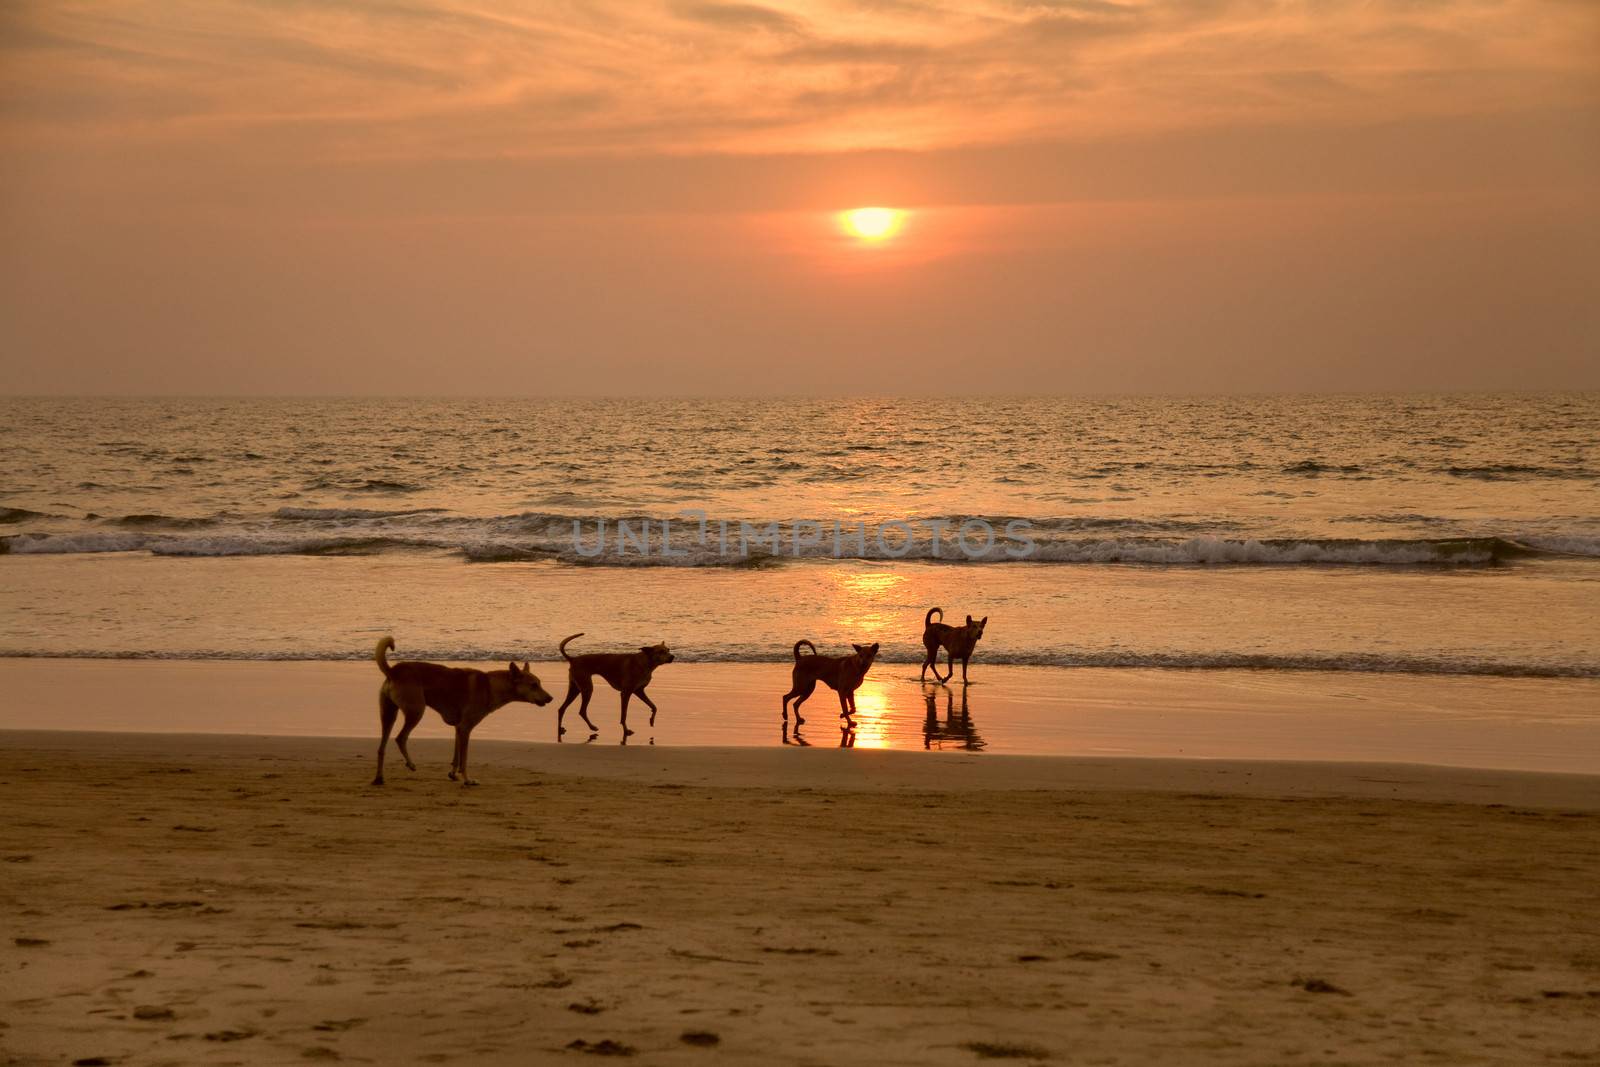  four Dogs at the beach during sunset. India, Goa